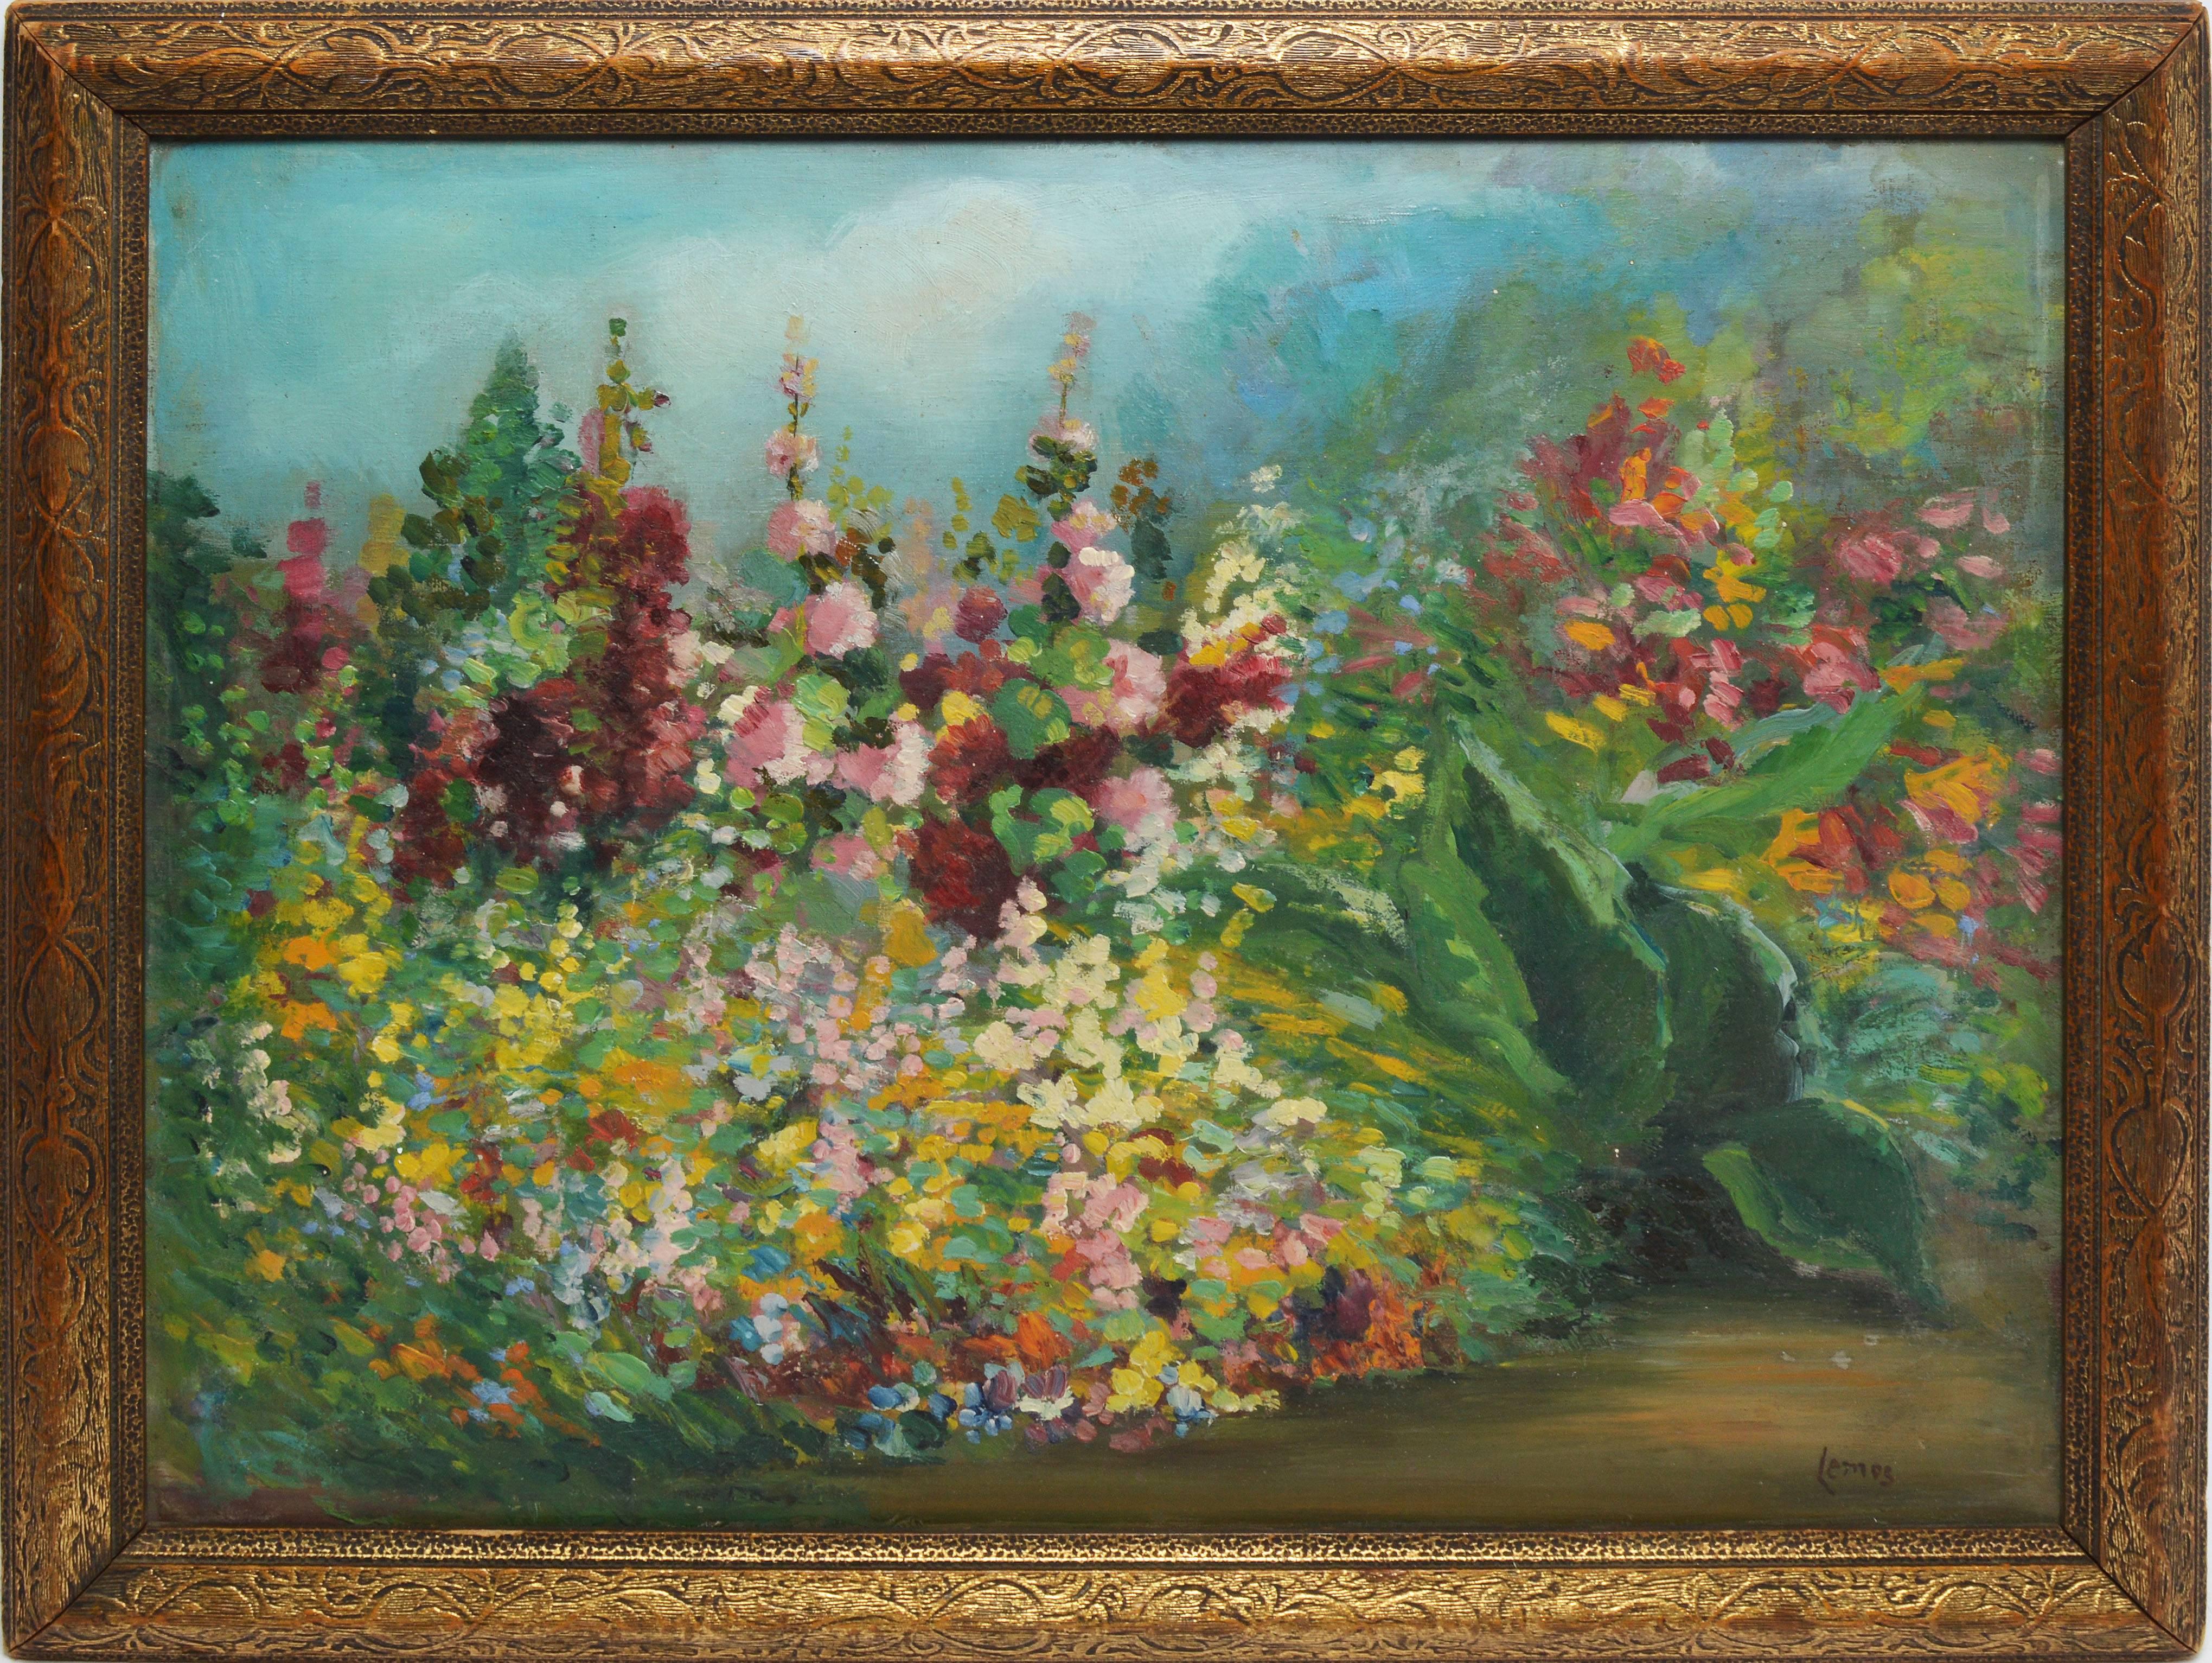 Unknown Landscape Painting - American Impressionist School Wild Flower Blooming Landscape